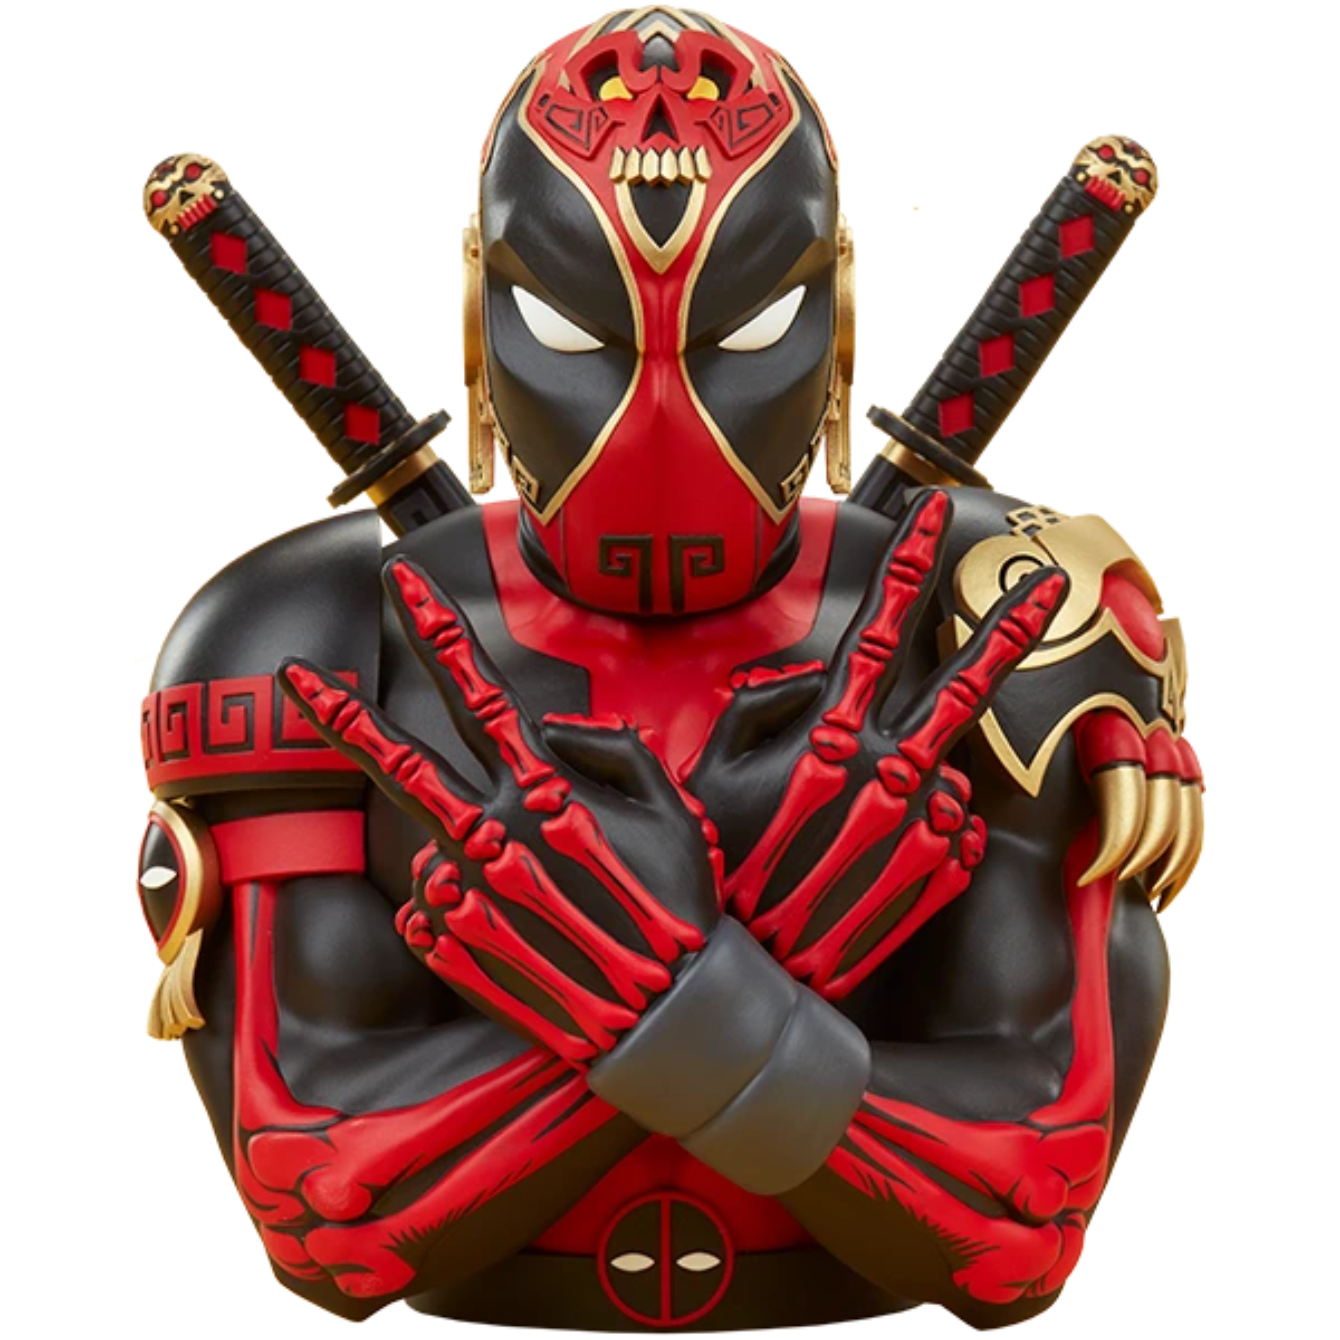 PRE-ORDER DEADPOOL Designer Collectible Bust by Sideshow Collectibles